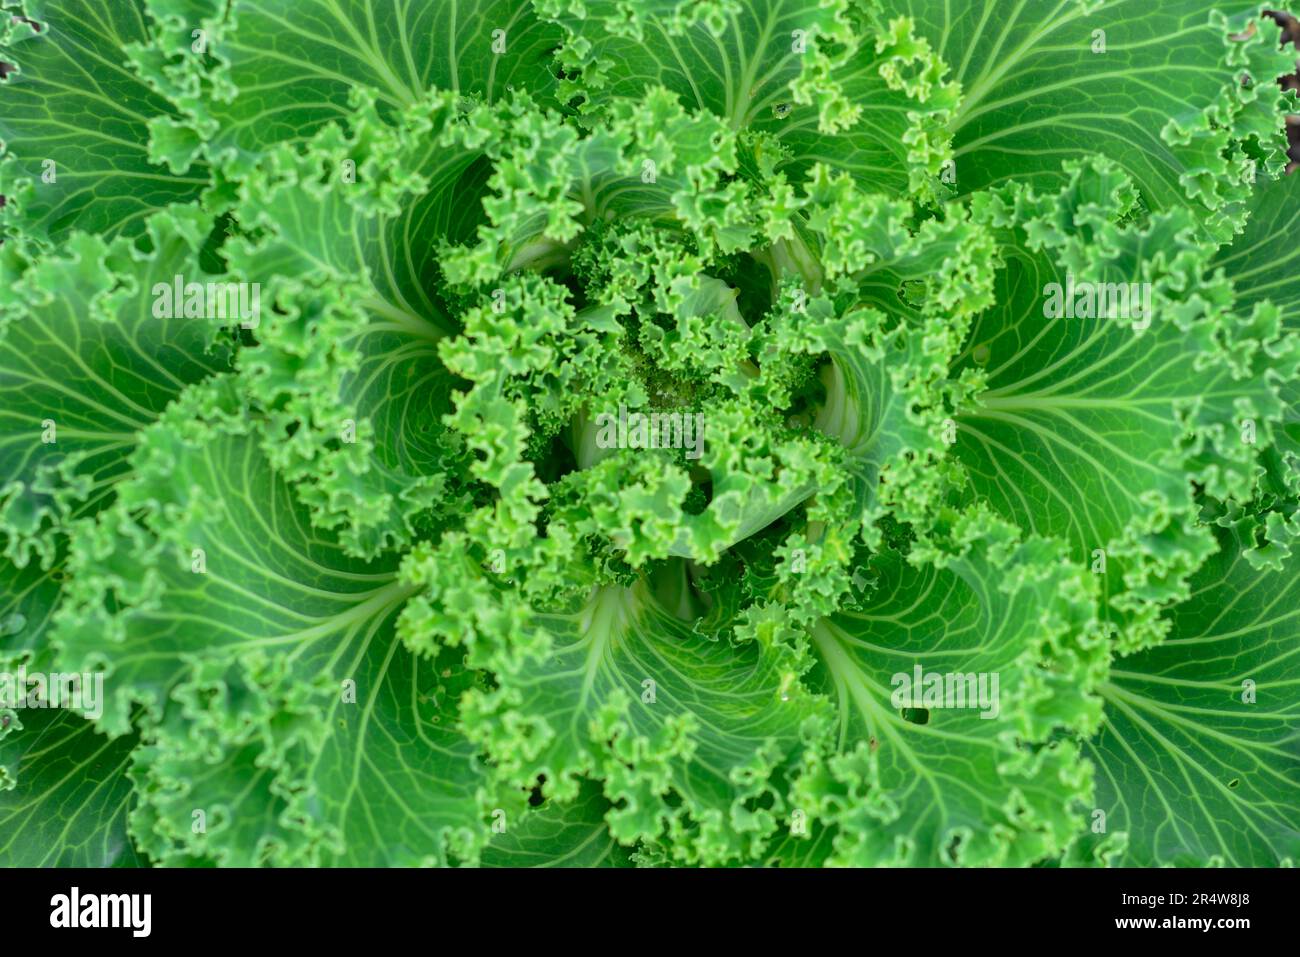 Closeup of a vibrant green organic kale growing in an urban garden. The ripe superfood vegetable has long thick curly leaves growing from a center Stock Photo